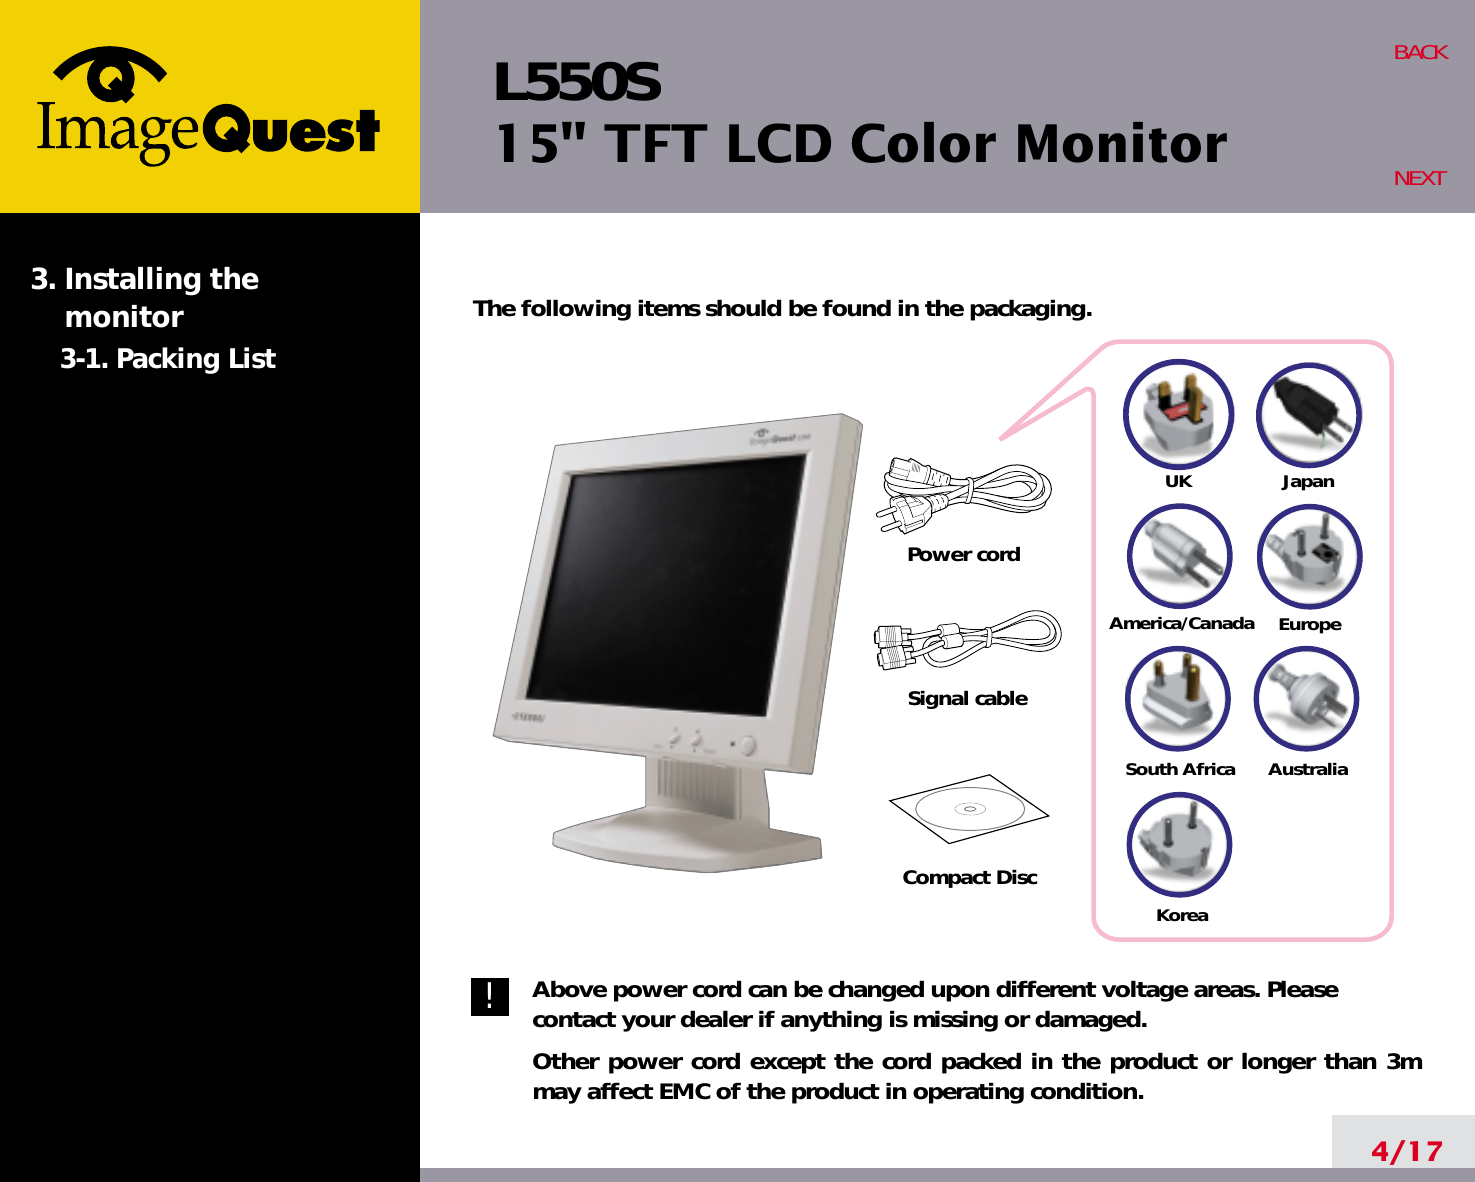 L550S15&quot; TFT LCD Color Monitor4/17BACKNEXTThe following items should be found in the packaging.Above power cord can be changed upon different voltage areas. Pleasecontact your dealer if anything is missing or damaged.Other power cord except the cord packed in the product or longer than 3mmay affect EMC of the product in operating condition.3. Installing the monitor3-1. Packing List!UKAmerica/CanadaJapanAustraliaKoreaEuropeSouth AfricaPower cordSignal cableCompact Disc